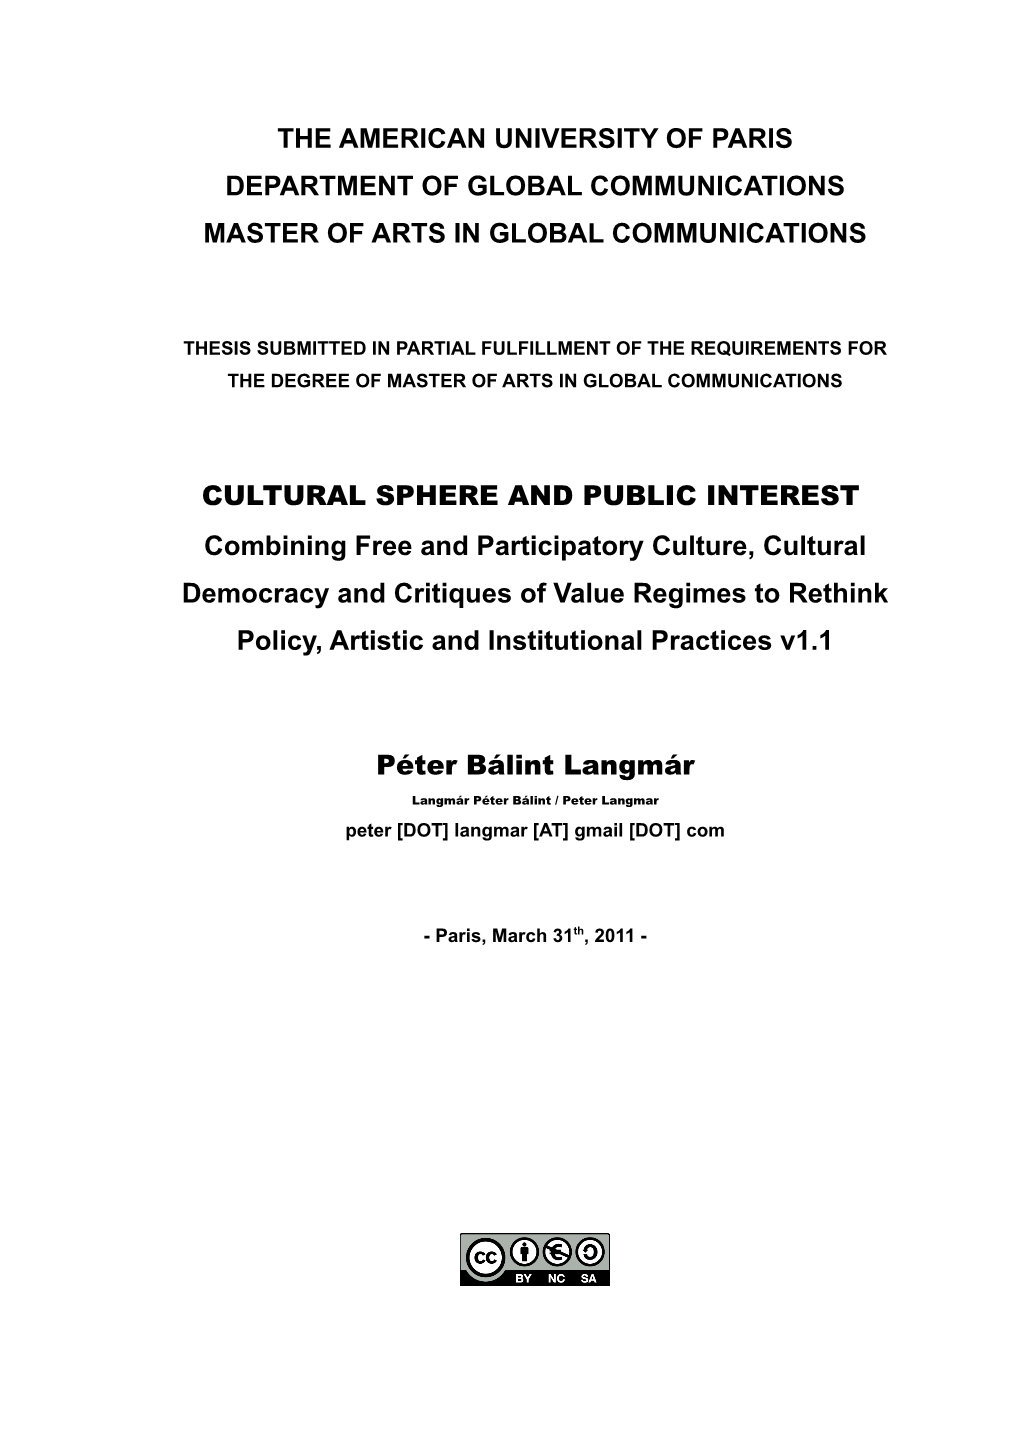 Cultural Sphere and Public Interest